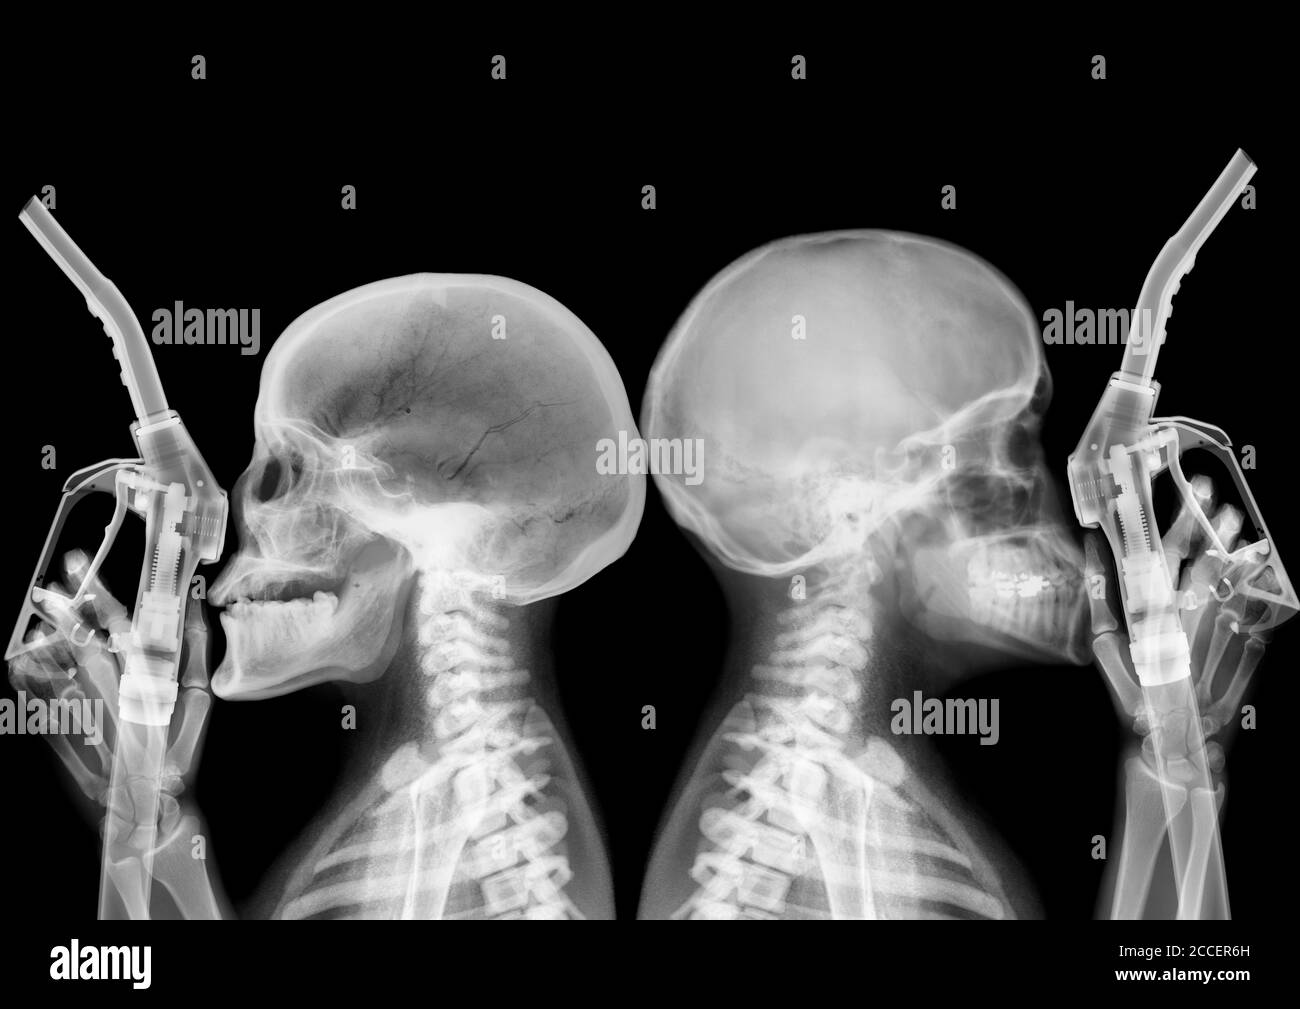 Petrol gasoline pumps and skeletons, X-ray Stock Photo